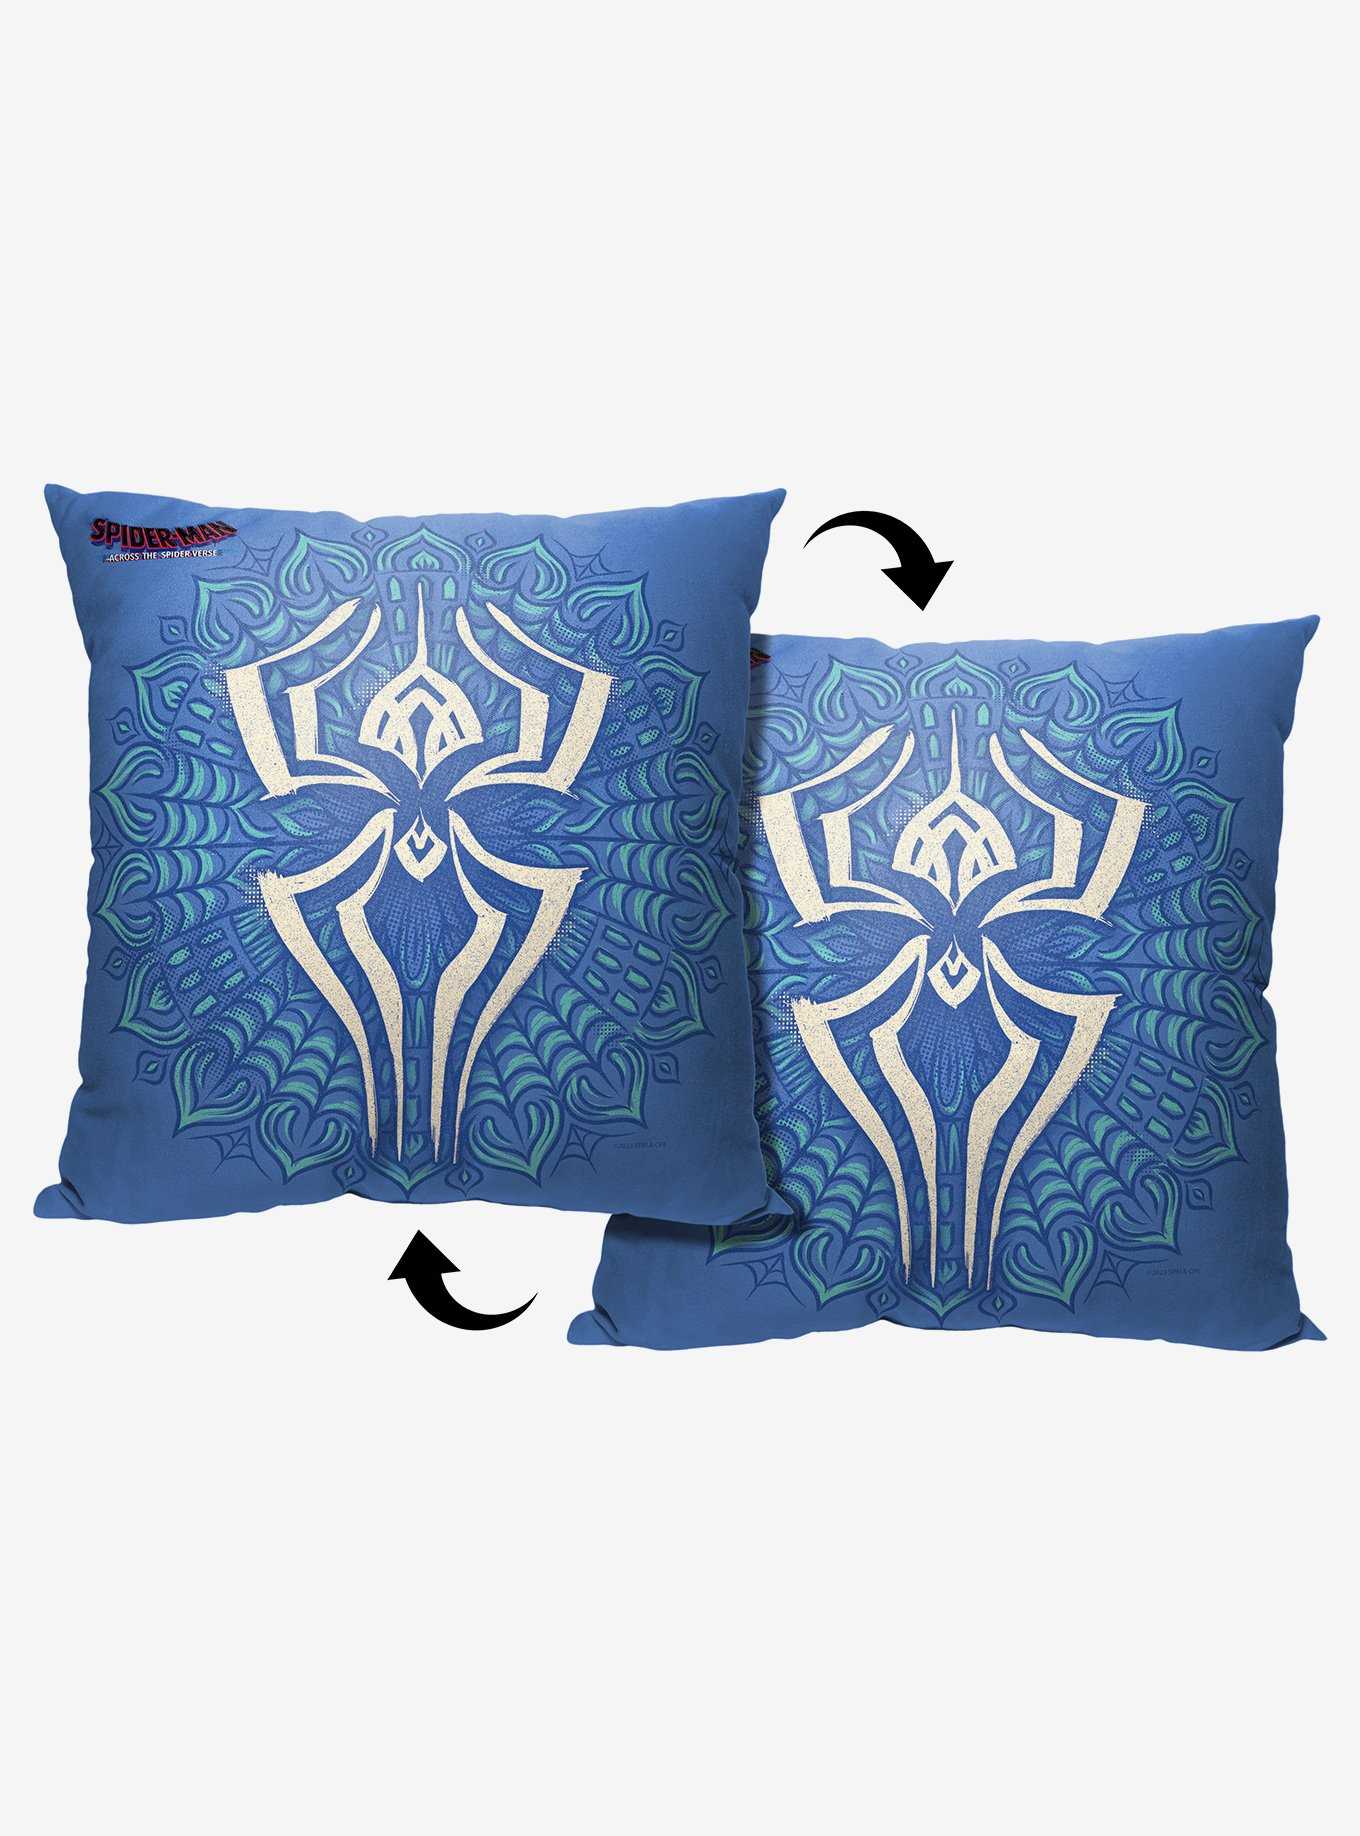 Marvel Spider-Man Across The Spiderverse India Emblem Printed Throw Pillow, , hi-res